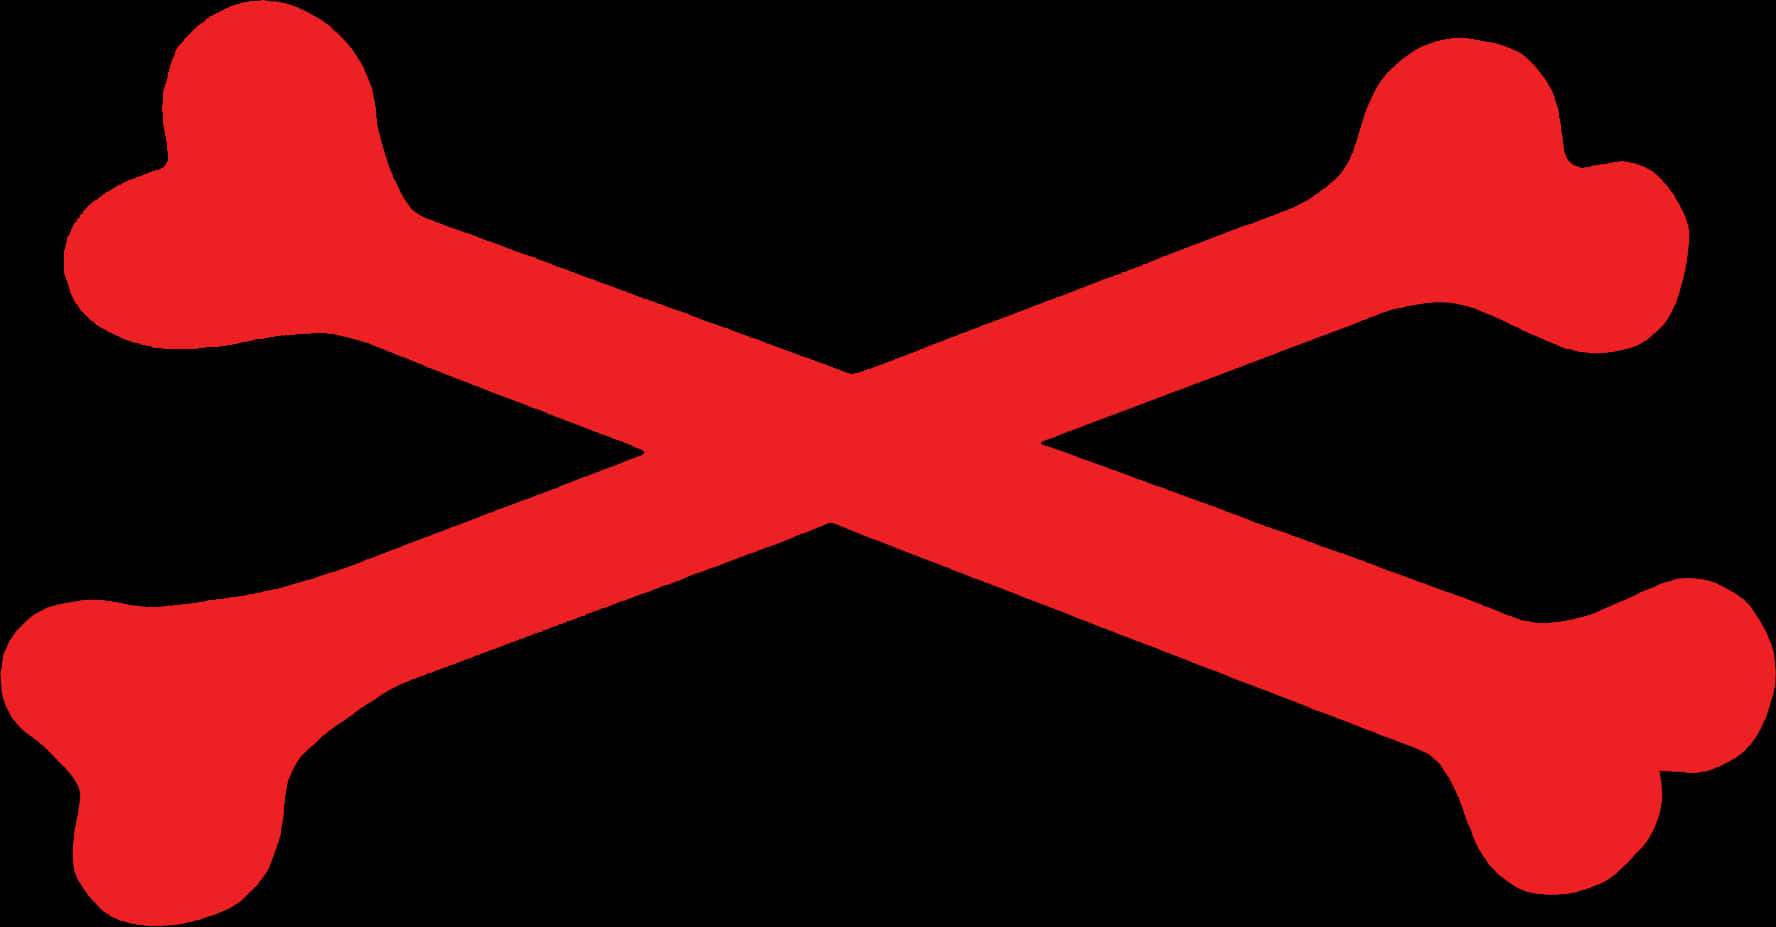 A Red X On A Black Background